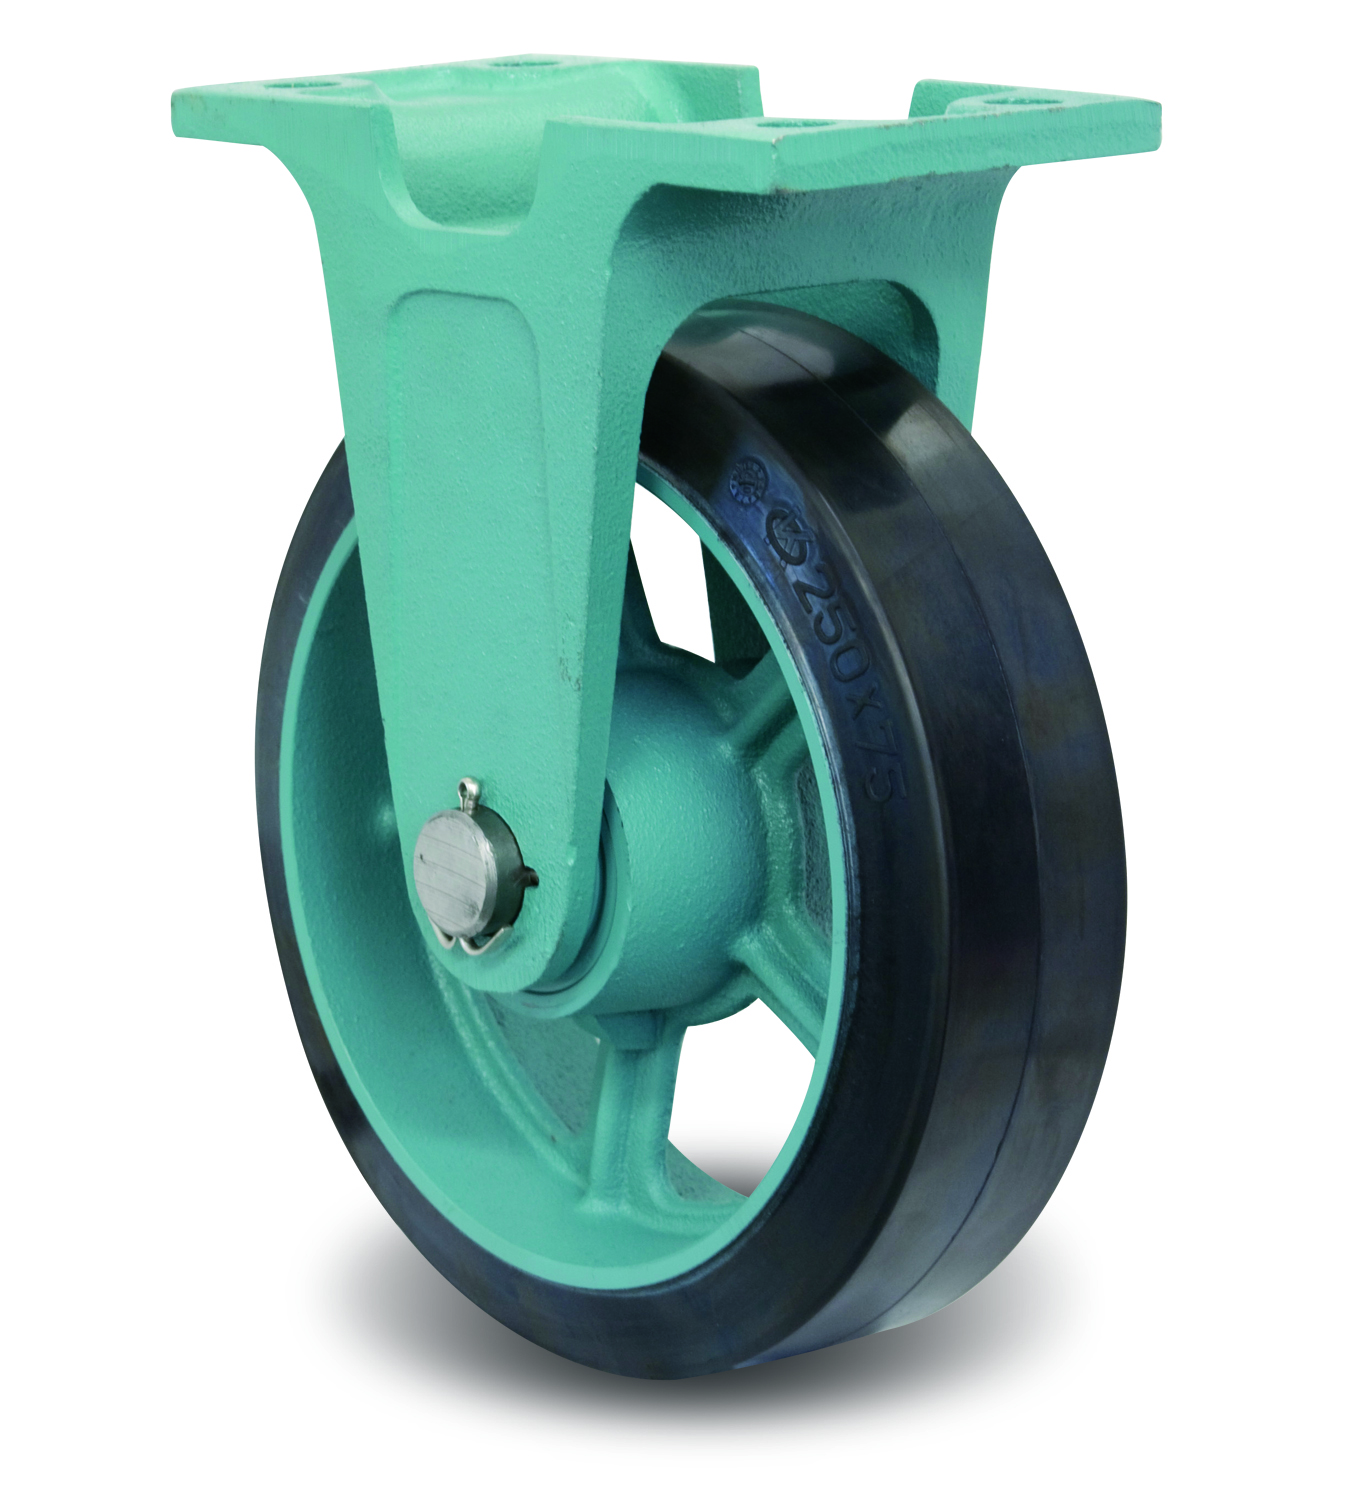 Ductile Caster Wide Type, Fixed MG-W Metal Fittings, E-MG-W